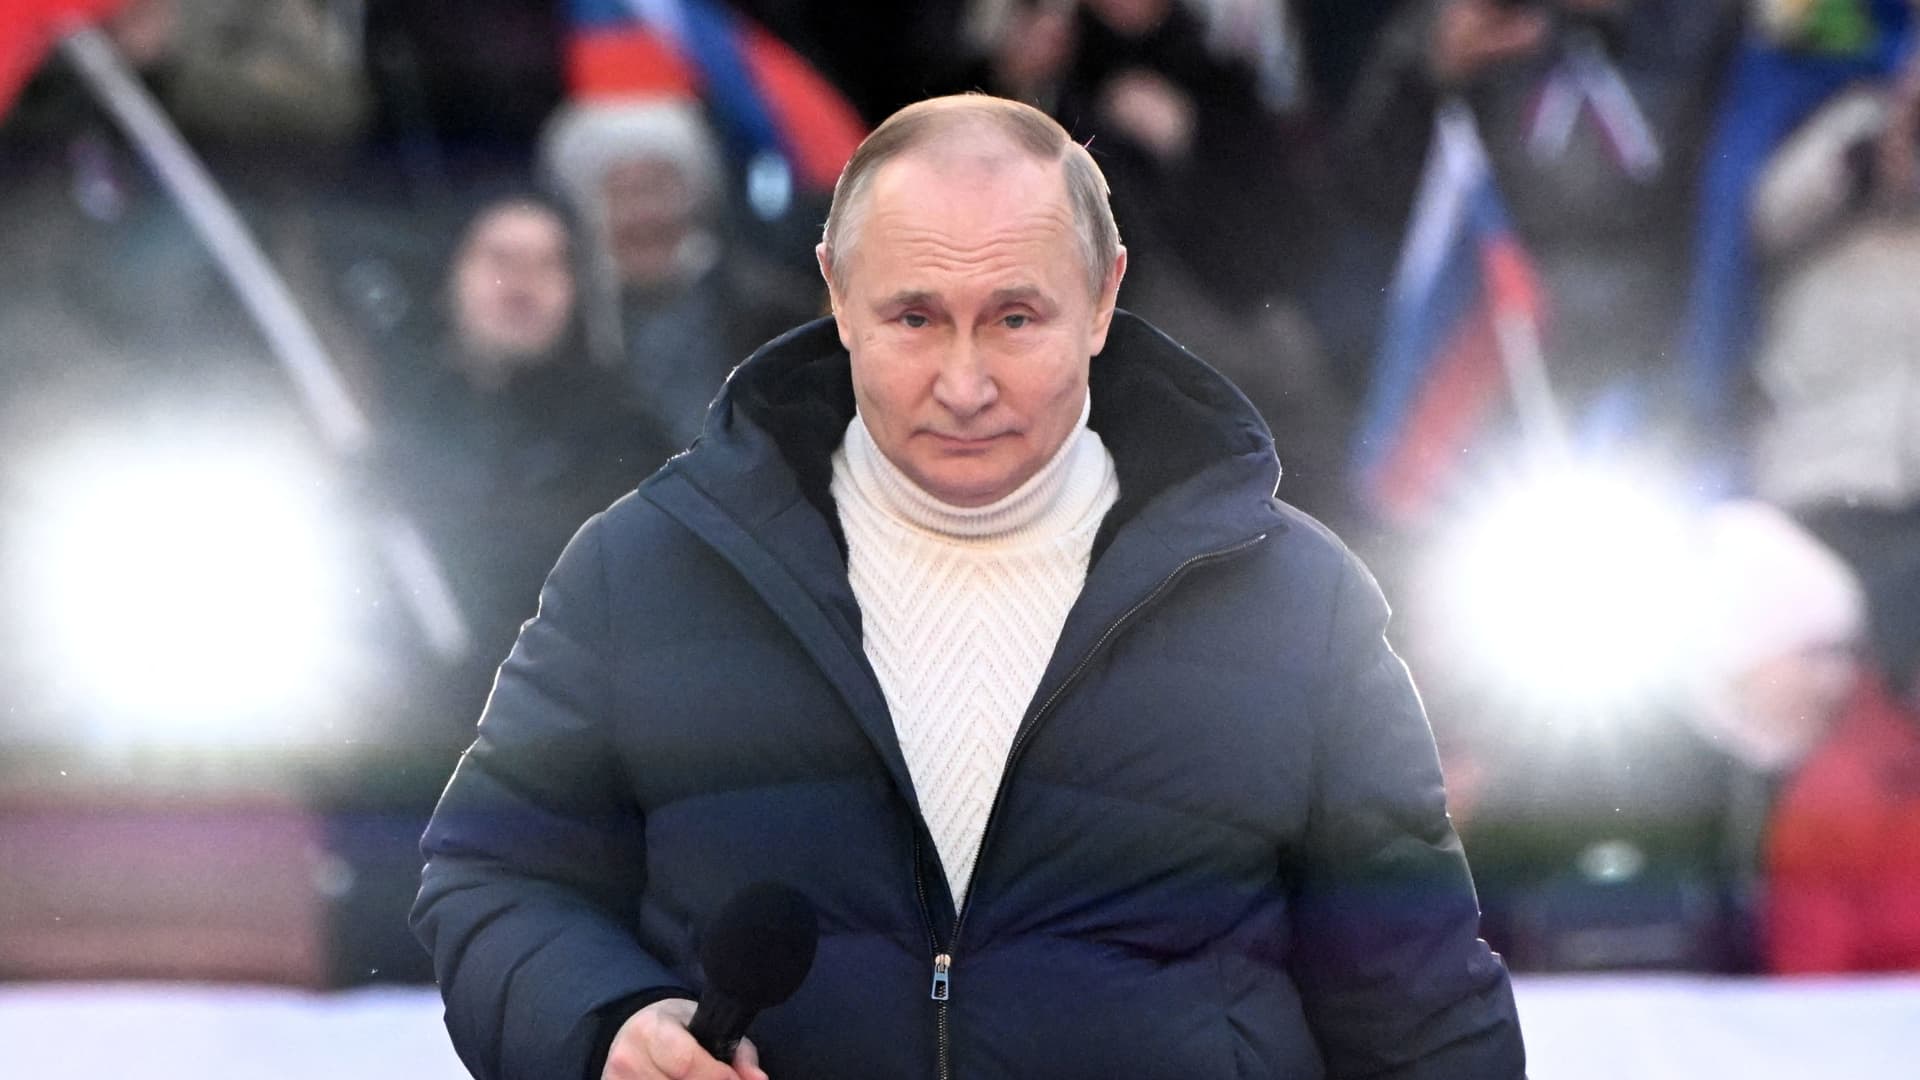 Russian President Vladimir Putin delivers a speech during a concert marking the eighth anniversary of Russia's annexation of Crimea at Luzhniki Stadium in Moscow, Russia March 18, 2022.